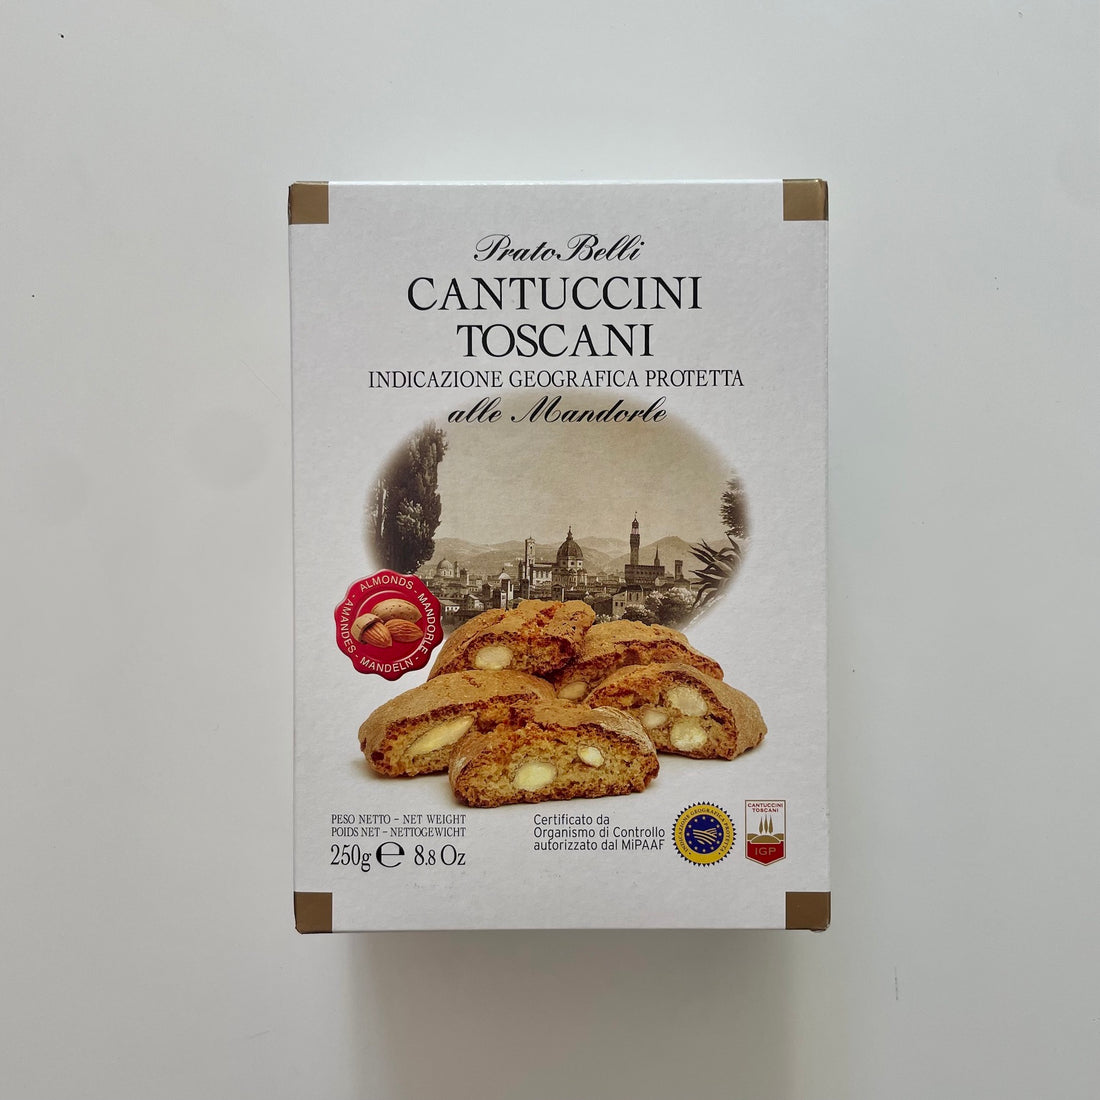 Cantuccino Toscani Almond Biscuits